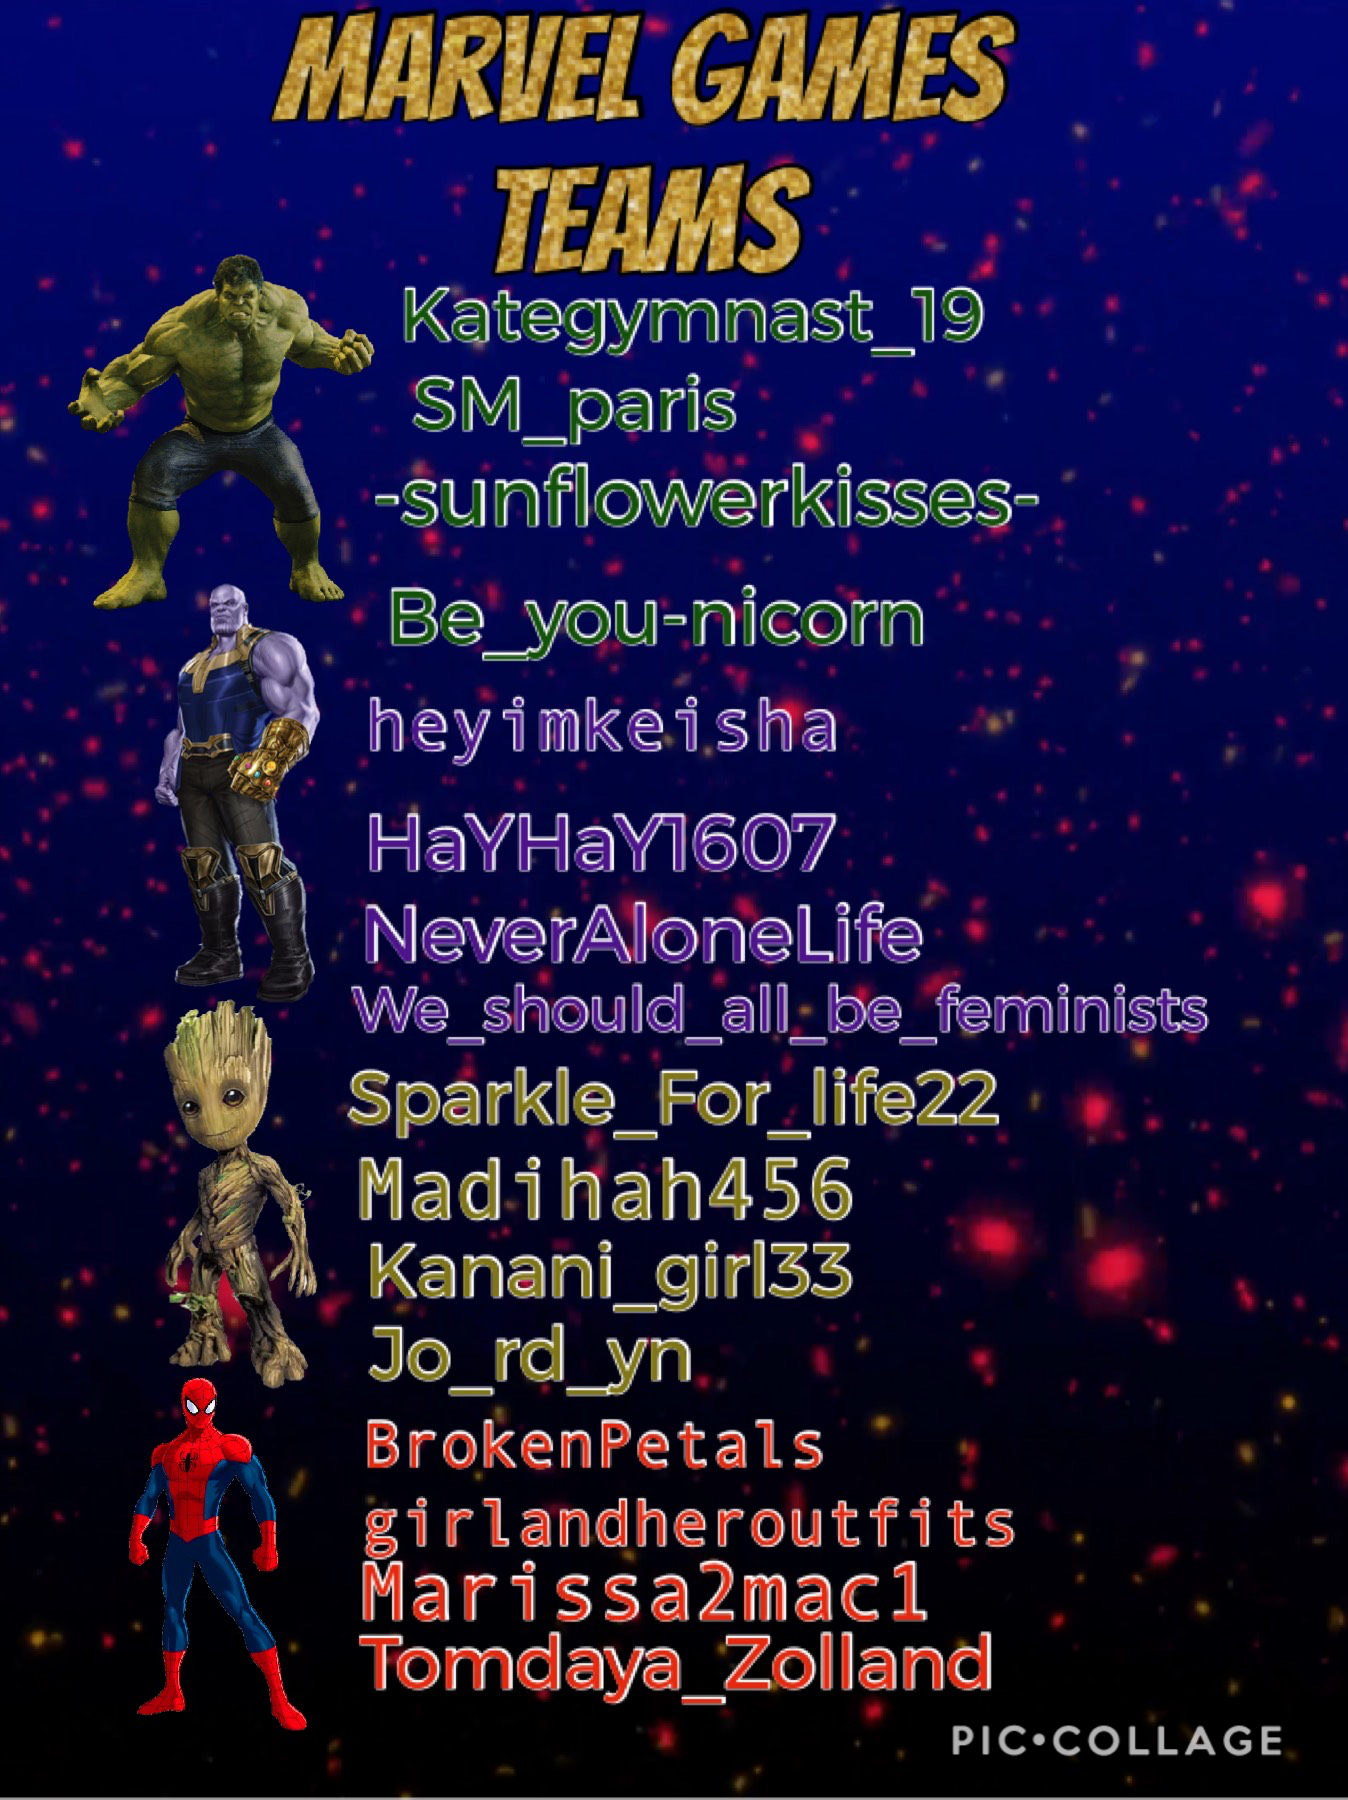 I had to change Be_you-nicorn to team hulk not thanos sorry for the mixup